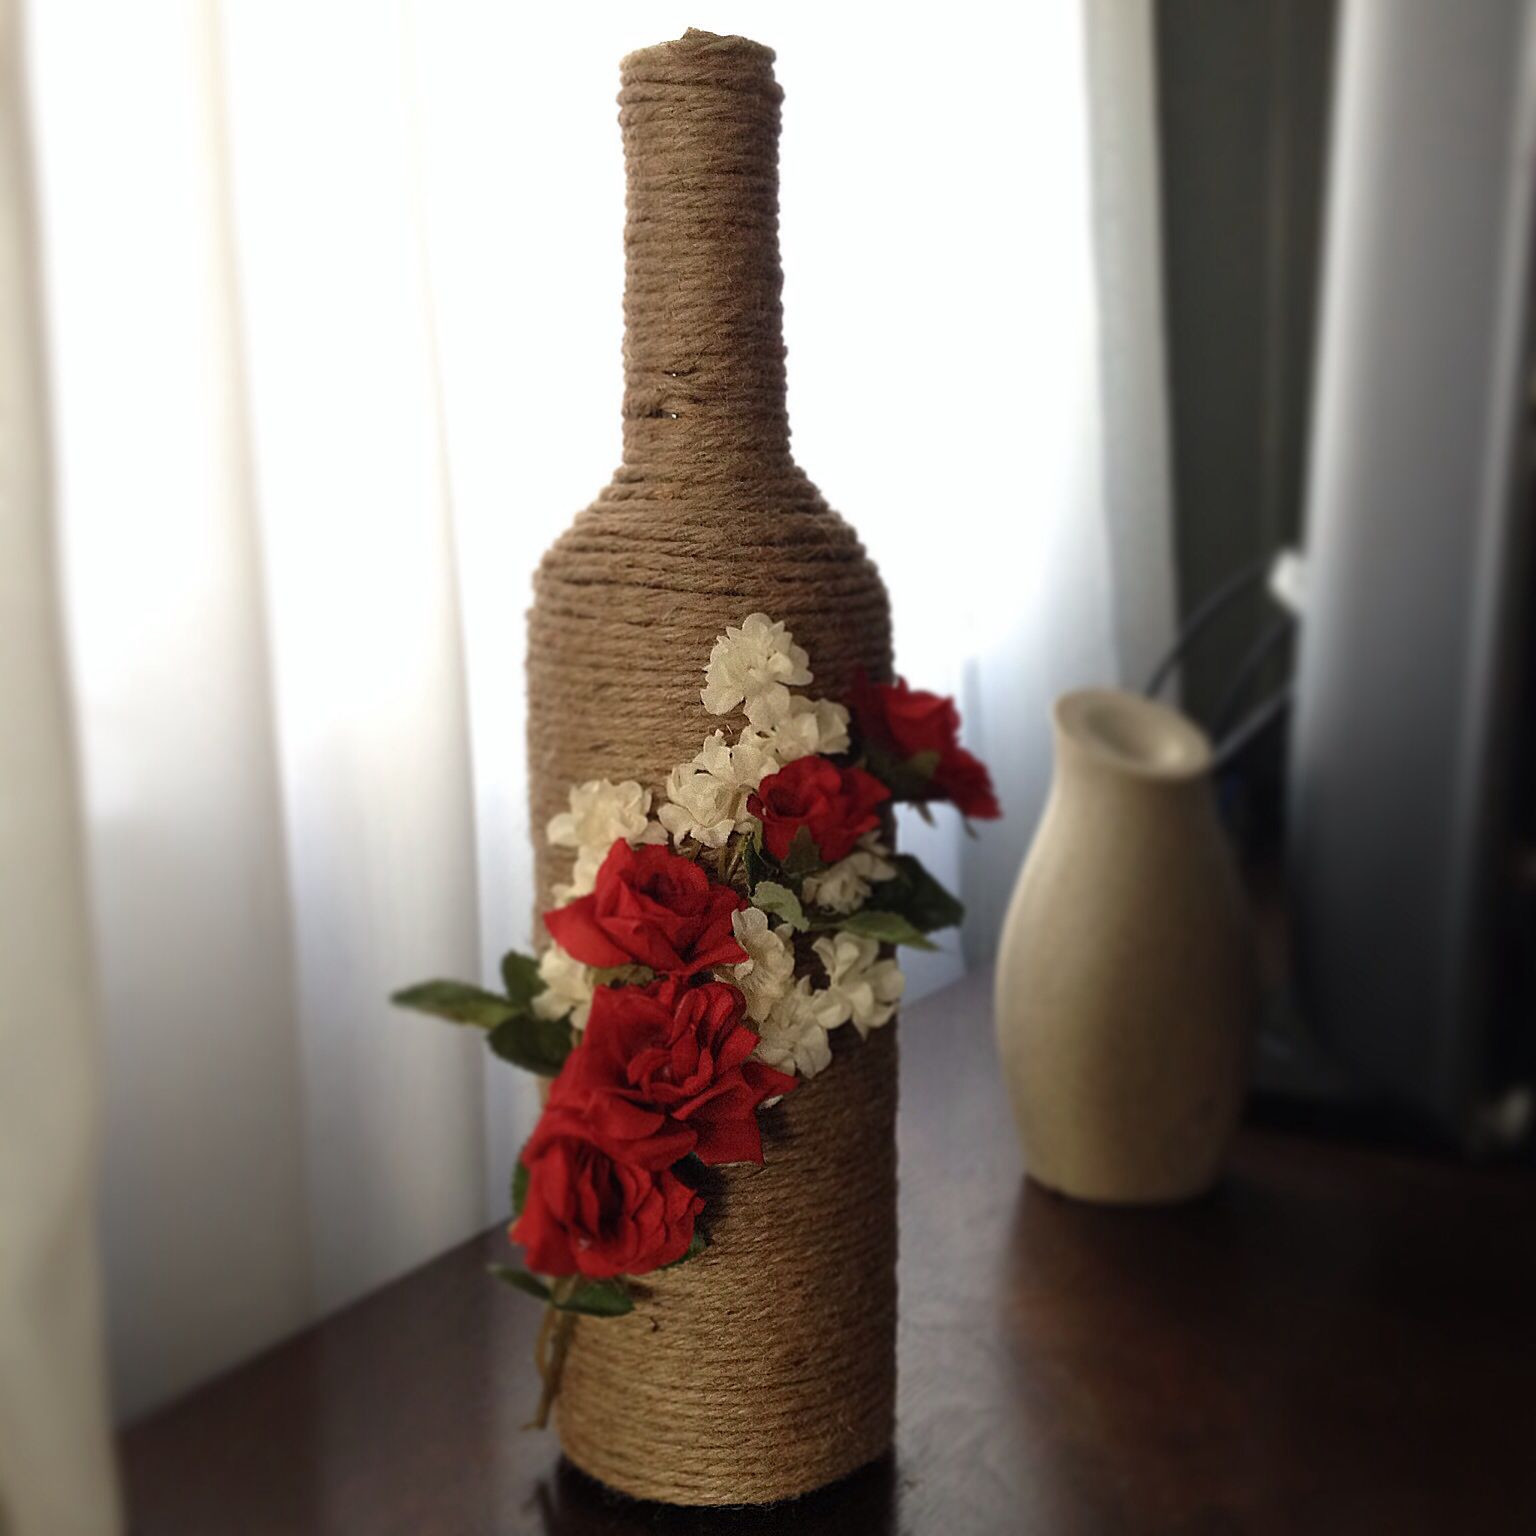 29 attractive Twine Wrapped Vase 2024 free download twine wrapped vase of twine wrapped wine bottle favors gifts and centerpieces by with regard to twine wrapped wine bottle favors gifts and centerpieces by simplysinatra on etsy